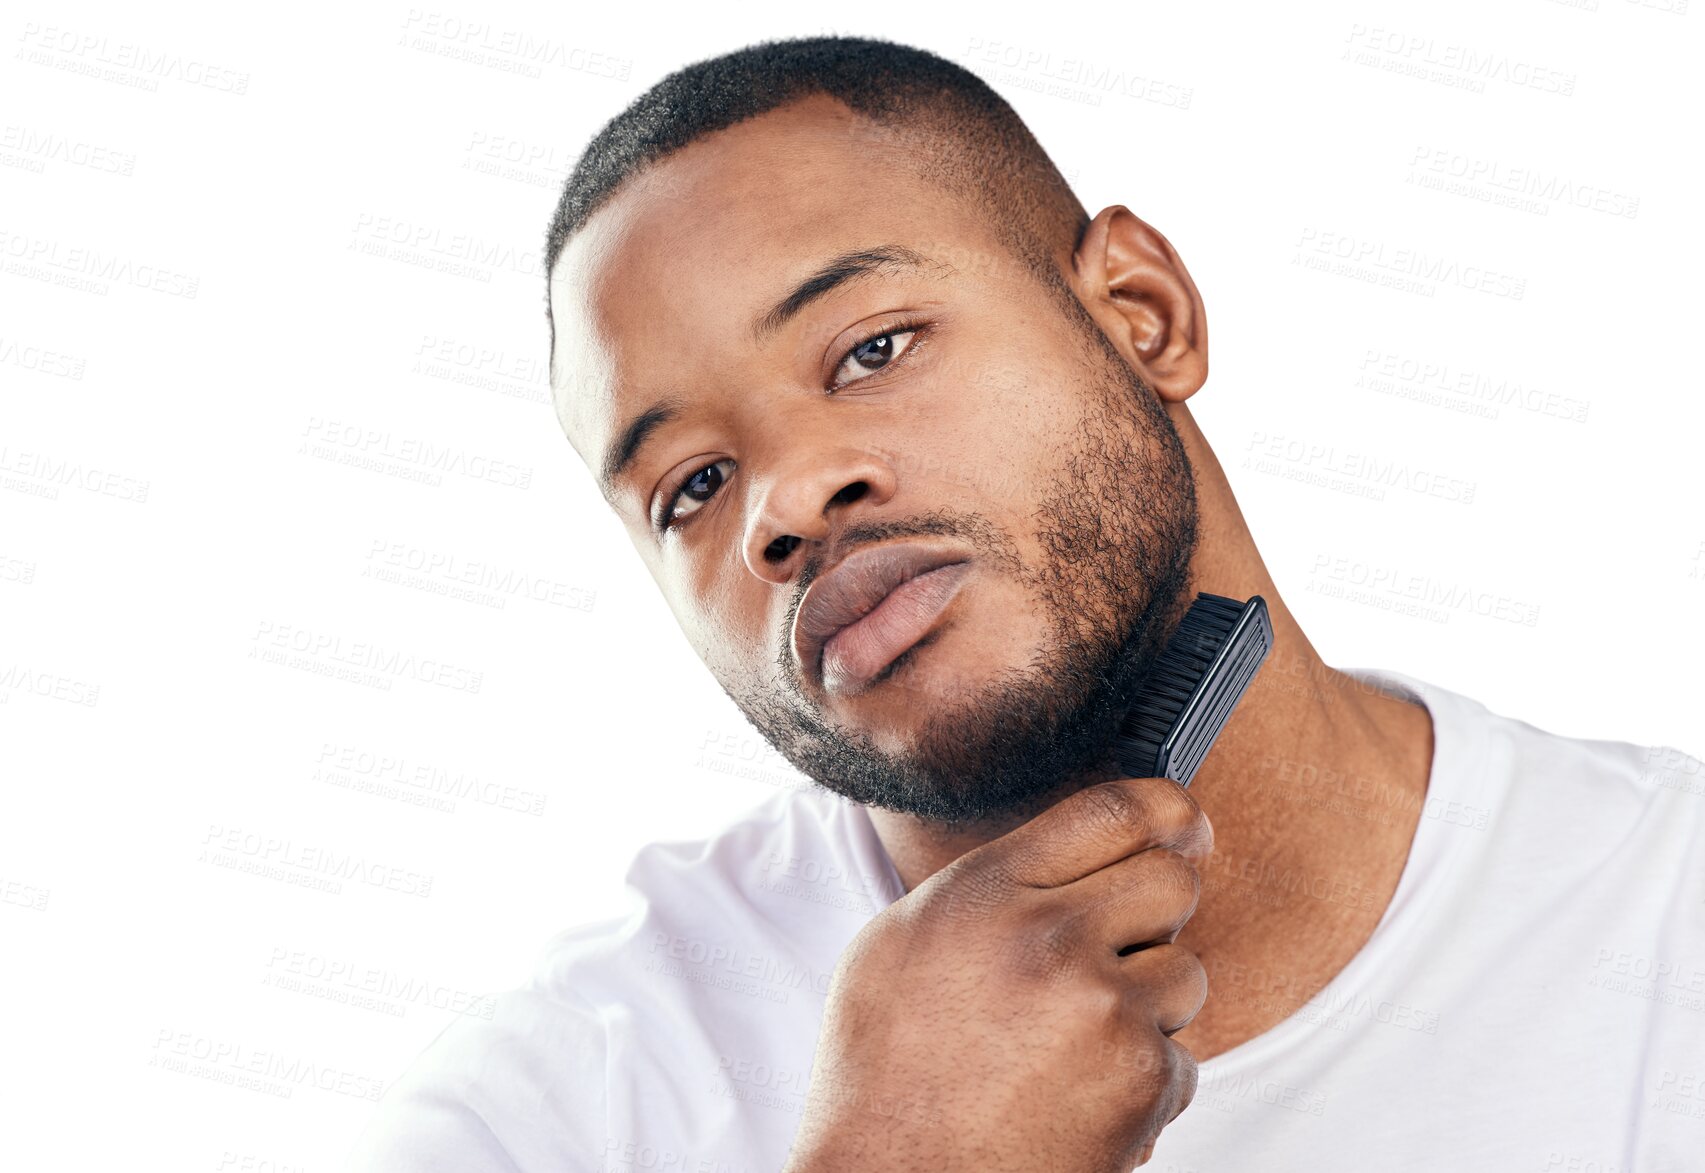 Buy stock photo Portrait, beauty or black man brushing beard or grooming isolated on transparent png background. Natural face, facial hair care maintenance or African handsome male person with self love or wellness 